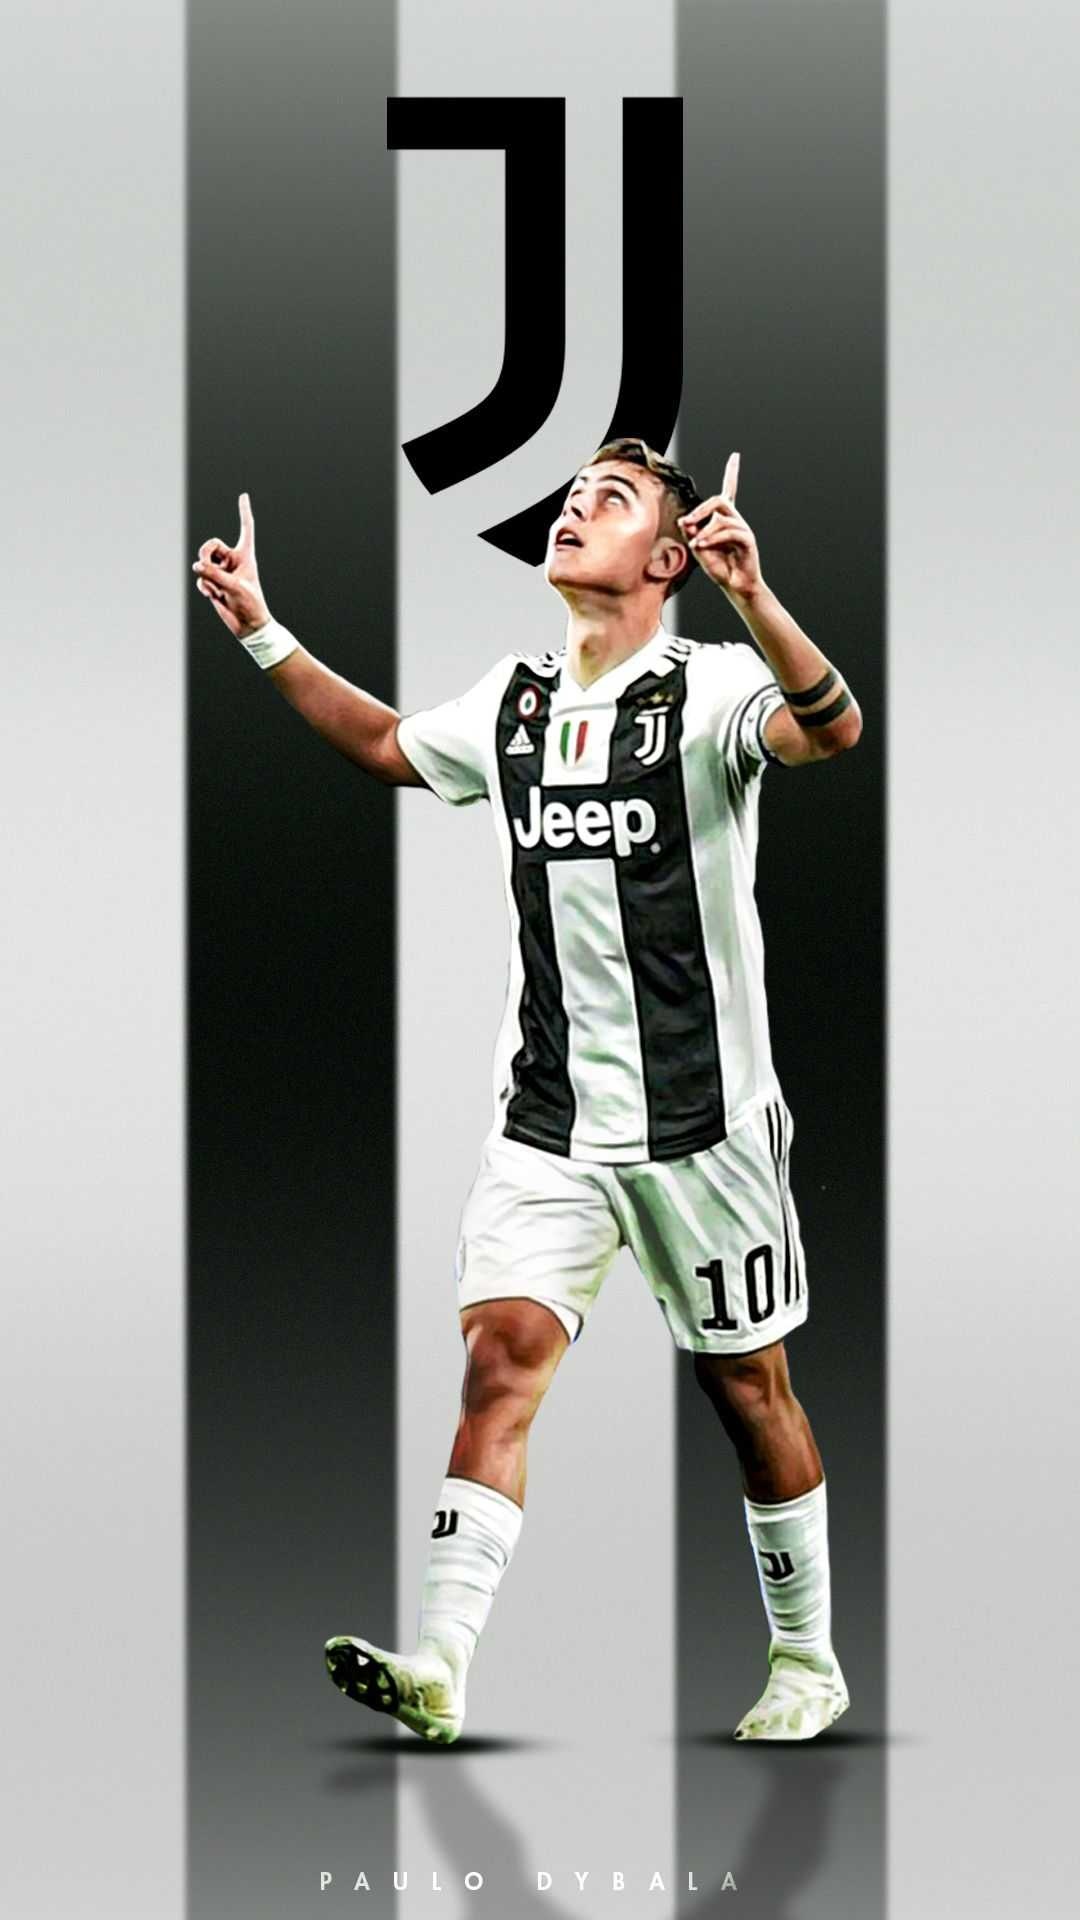 Dybala: An Argentinian footballer who is renowned for his impeccable style of play and the ability to score goals. 1080x1920 Full HD Wallpaper.